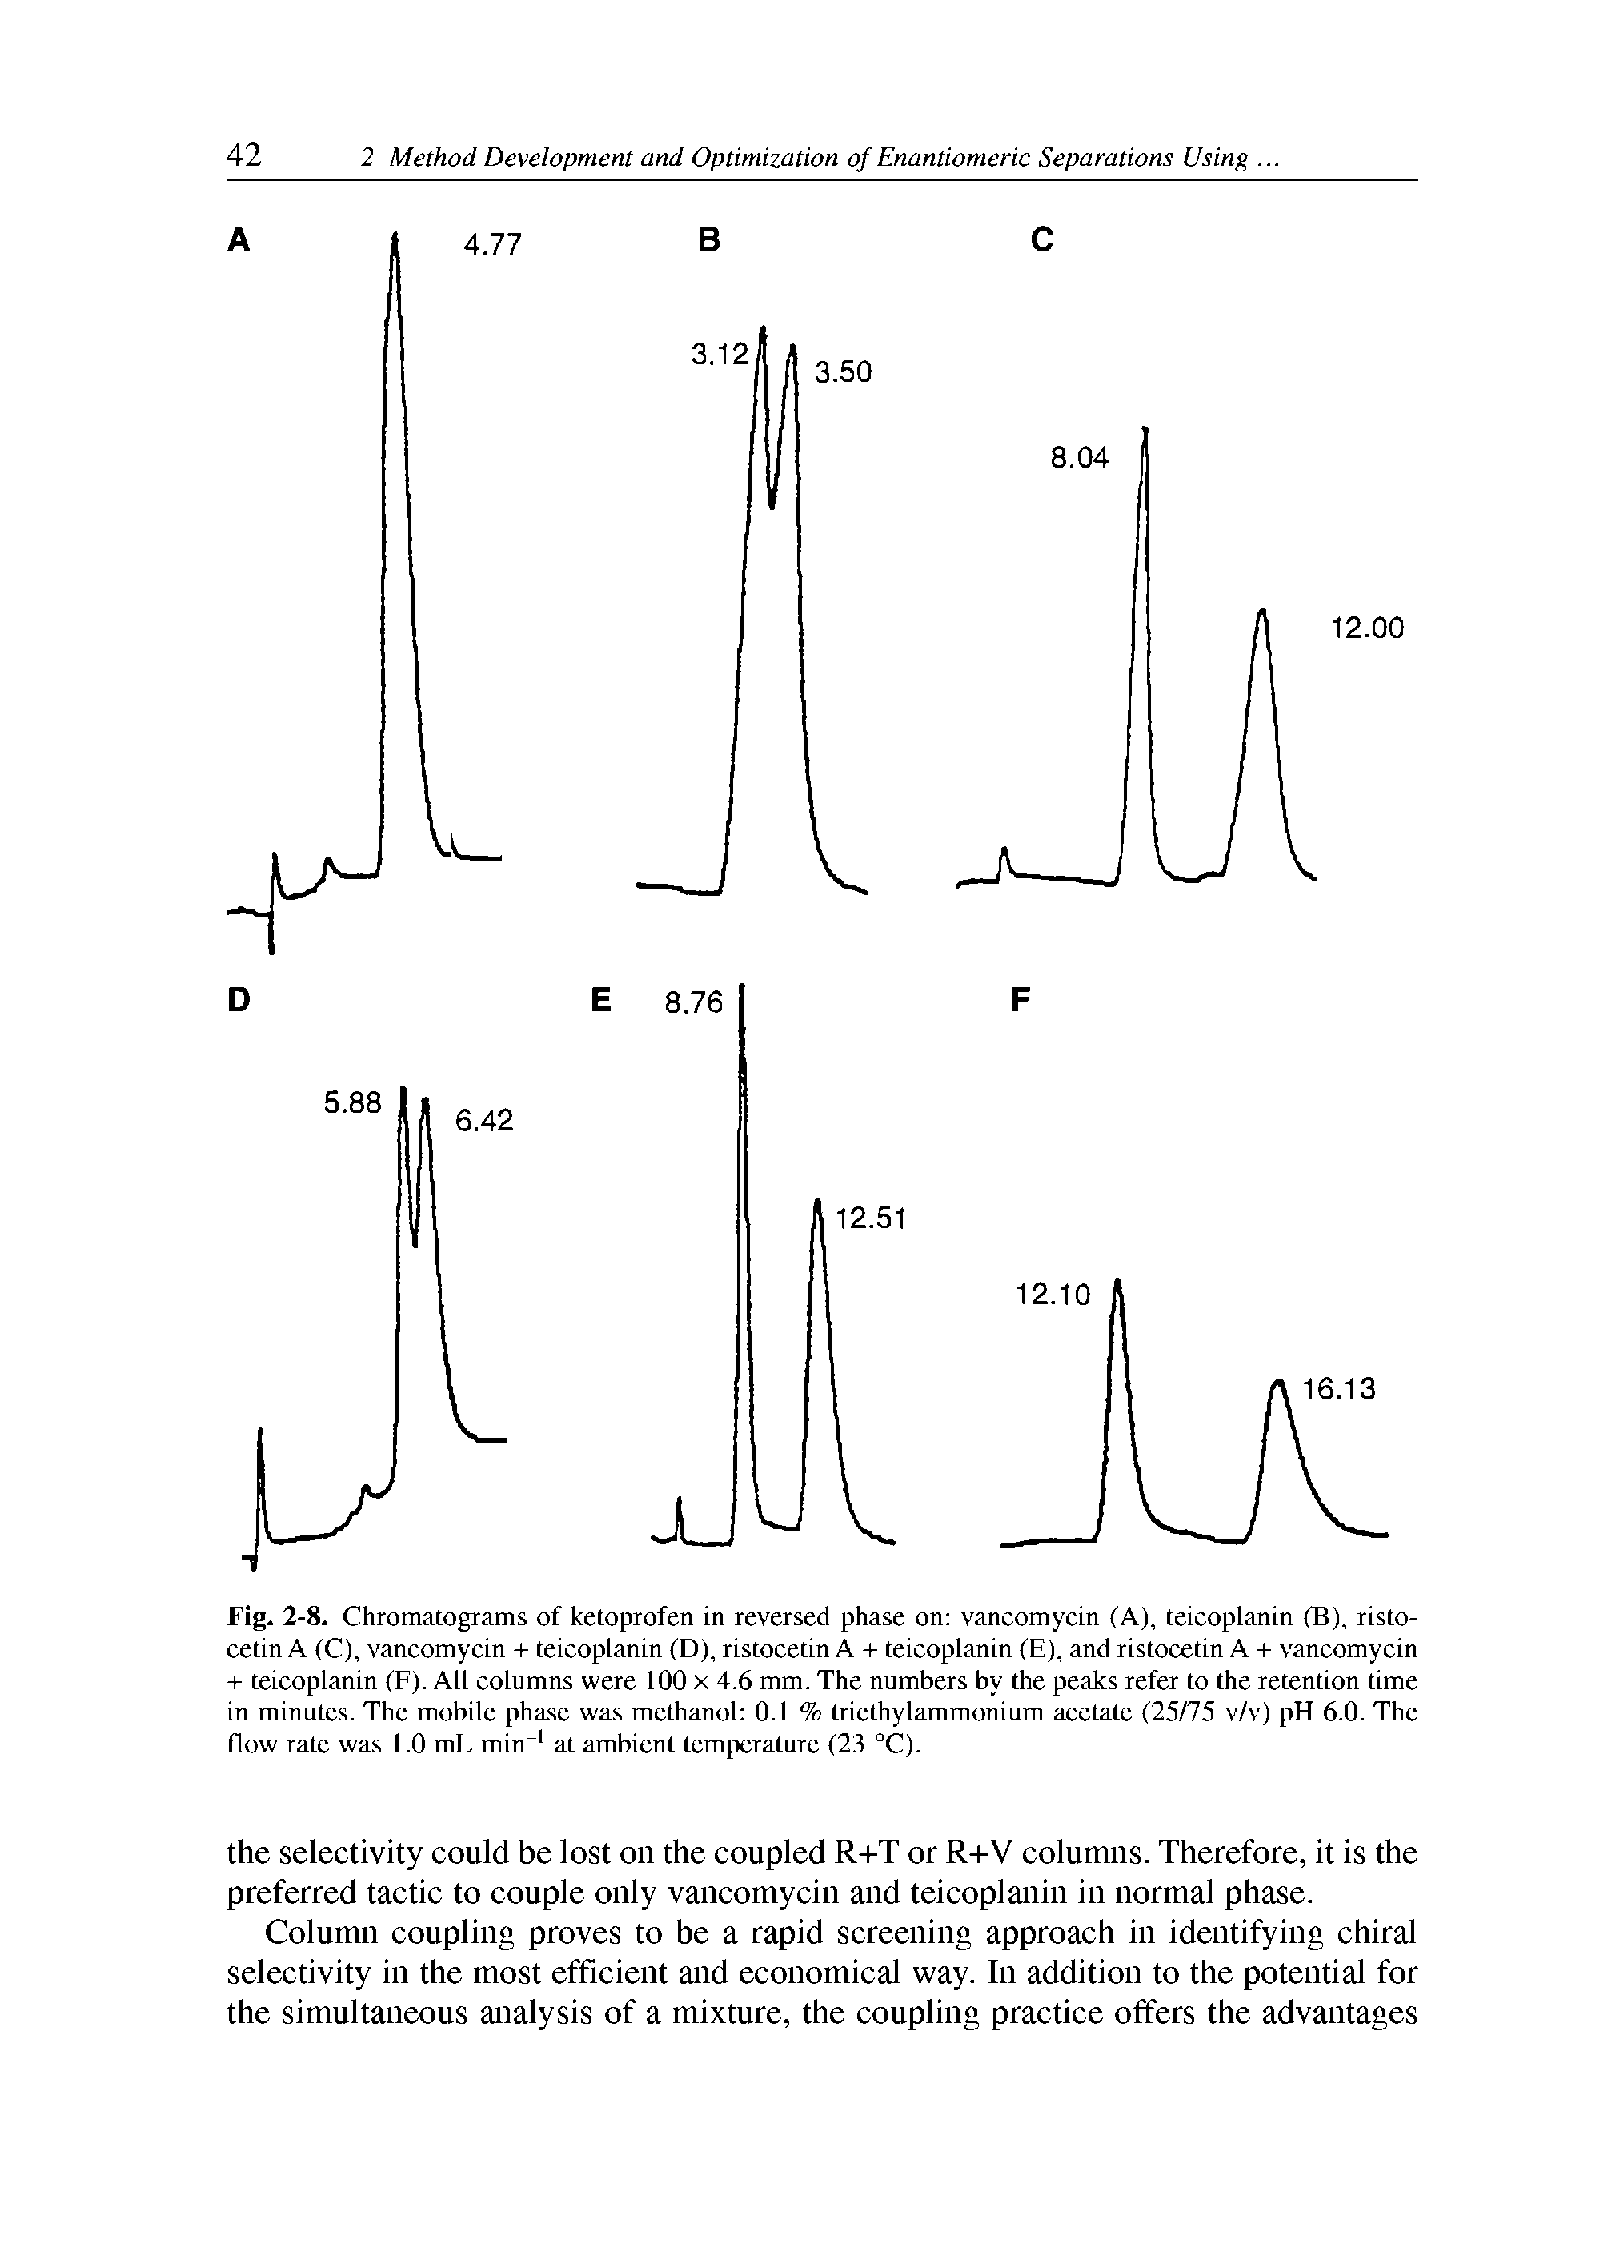 Fig. 2-8. Chromatograms of ketoprofen in reversed phase on vaneomyein (A), teieoplanin (B), risto-eetin A (C), vaneomyein + teieoplanin (D), ristoeetin A + teieoplanin (E), and ristoeetin A + vaneomyein + teieoplanin (F). All eolumns were 100 x 4.6 mm. The numbers by the peaks refer to the retention time in minutes. The mobile phase was methanol 0.1 % triethylammonium aeetate (25/75 v/v) pH 6.0. The flow rate was 1.0 mL min at ambient temperature (23 °C).